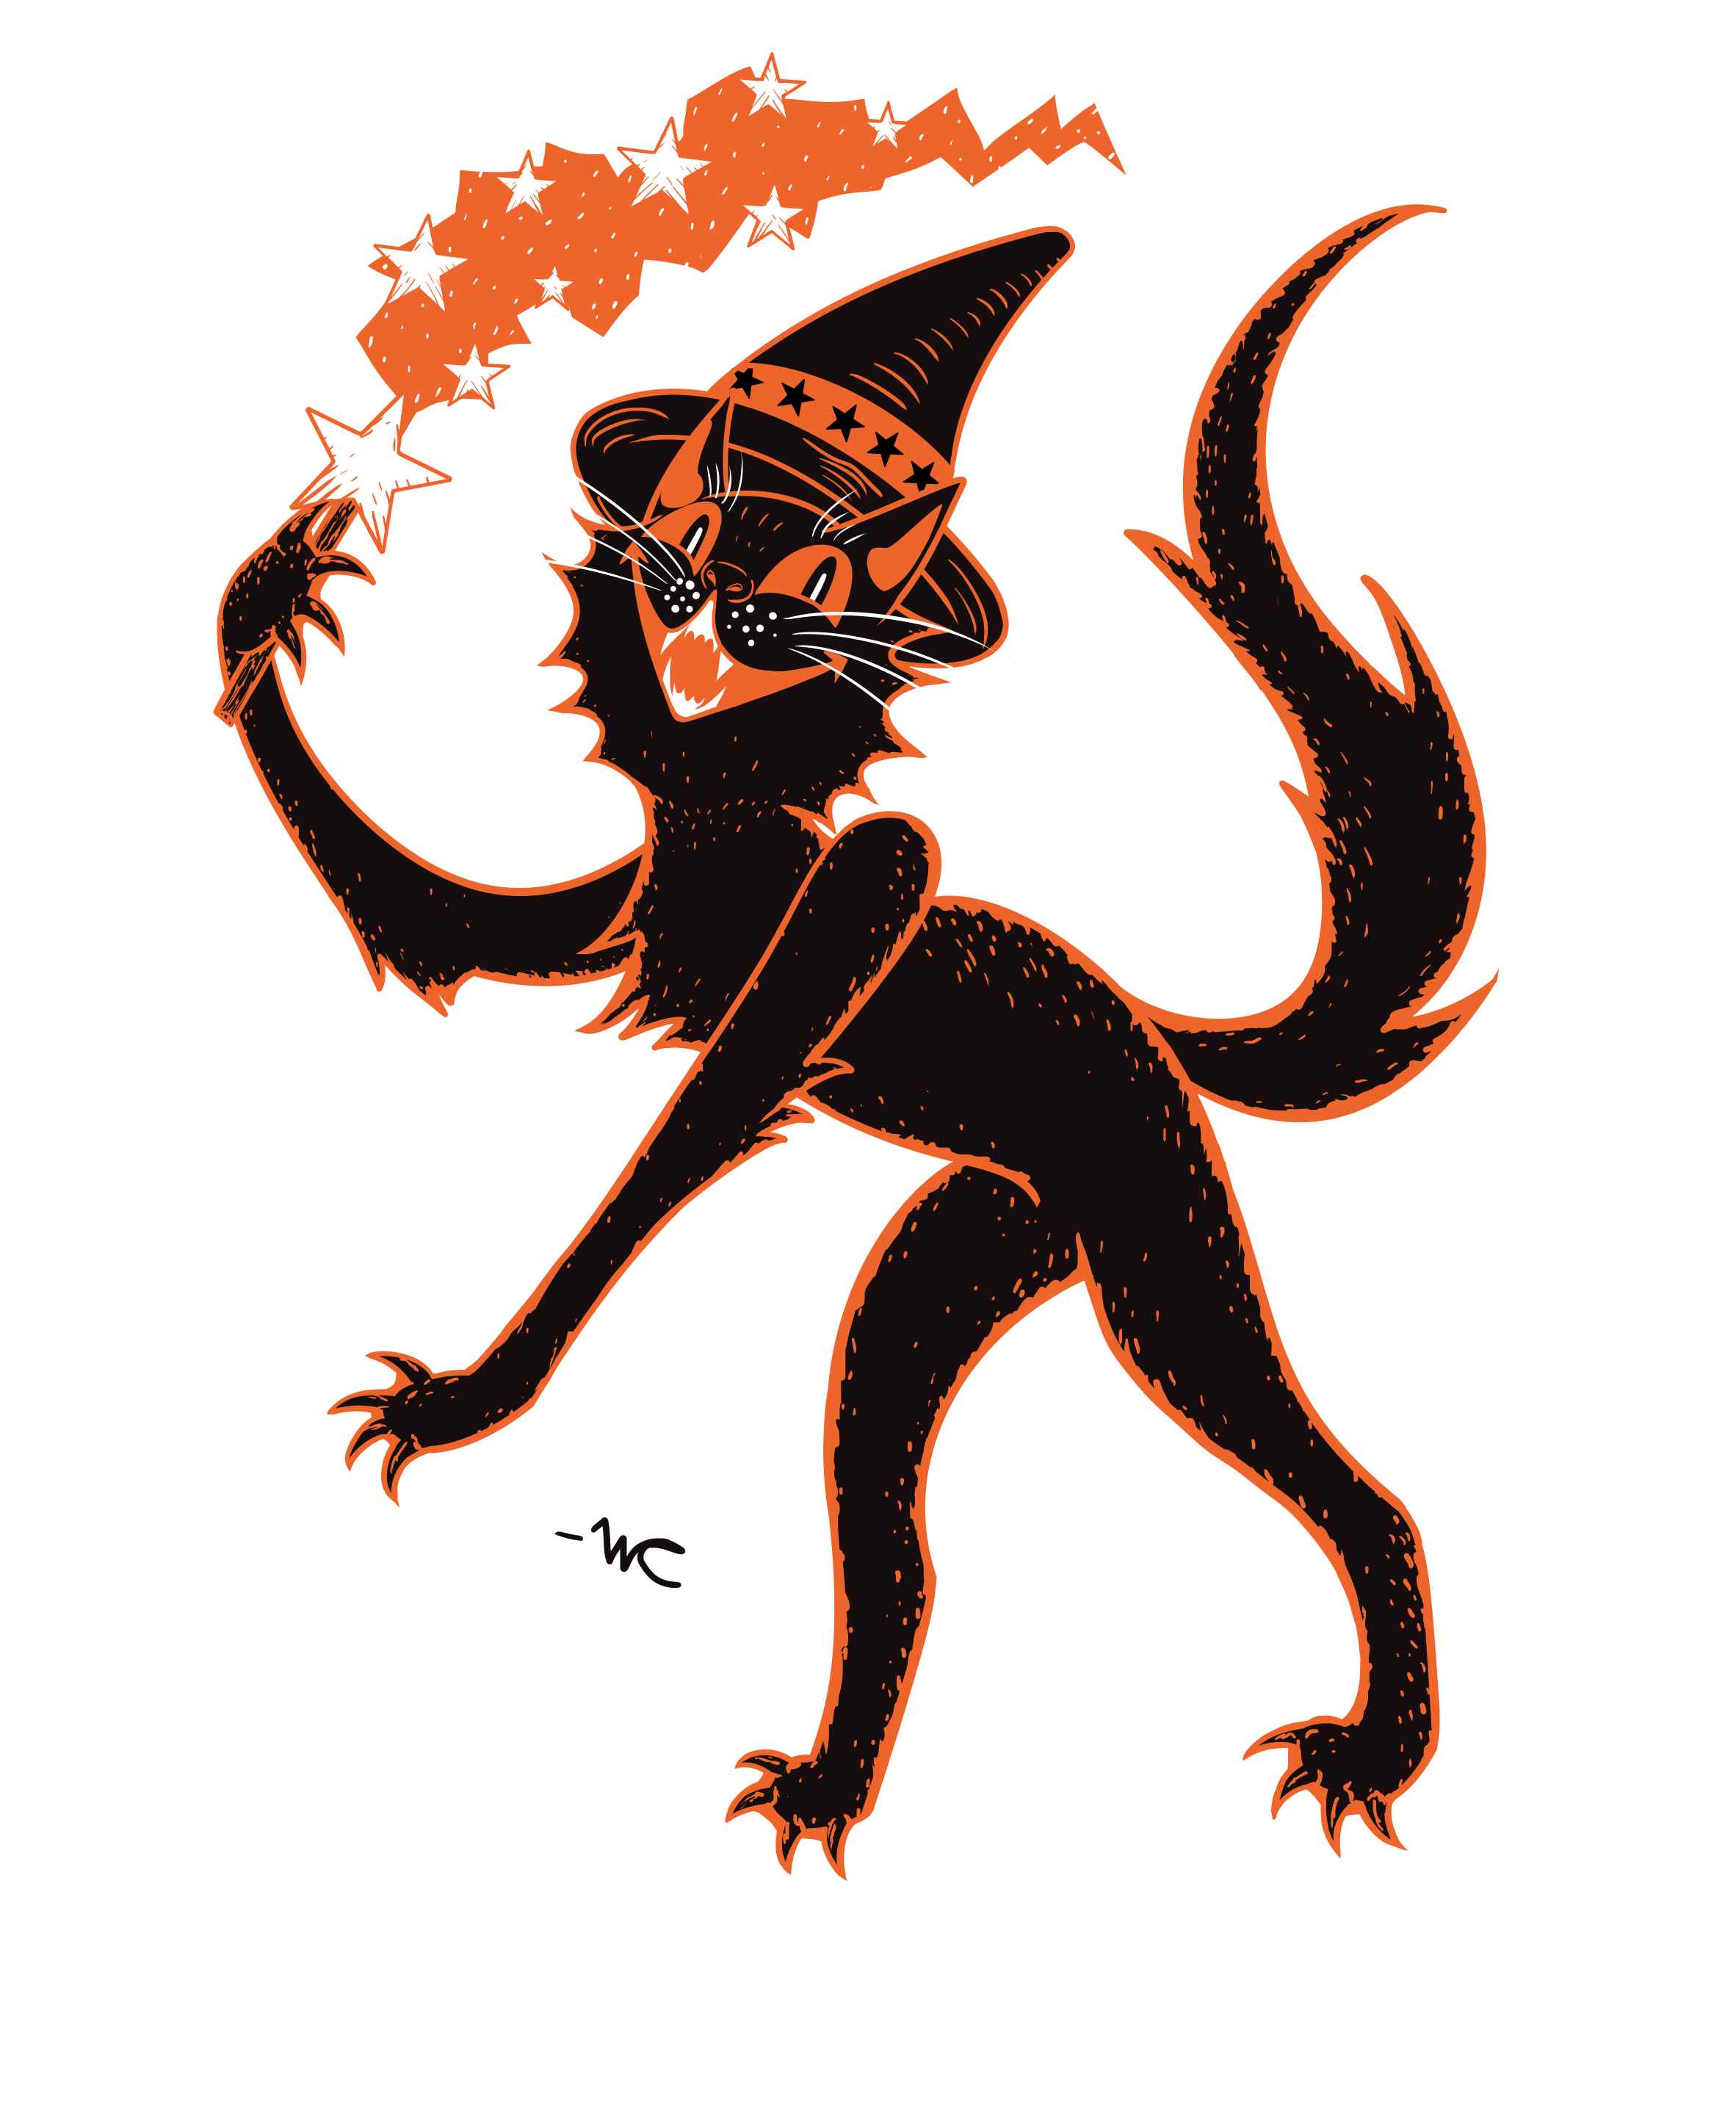 A black and orange cat drawn in a Beistle style. It has a witch hat and a magic wand that's shooting stars. It has a happy expression with its mouth open and smiling.